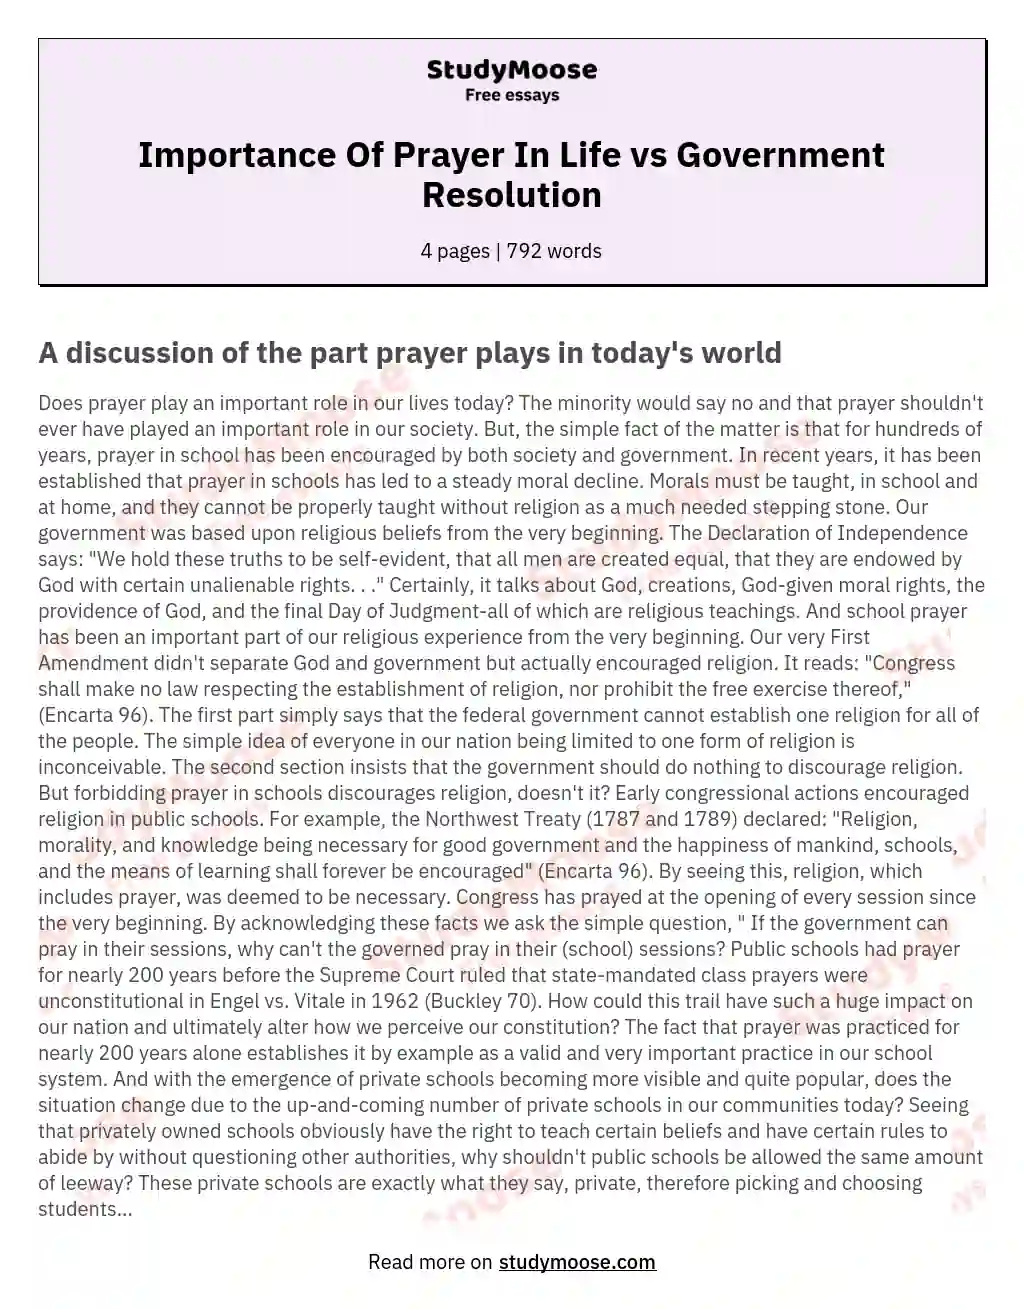 Importance Of Prayer In Life vs Government Resolution essay